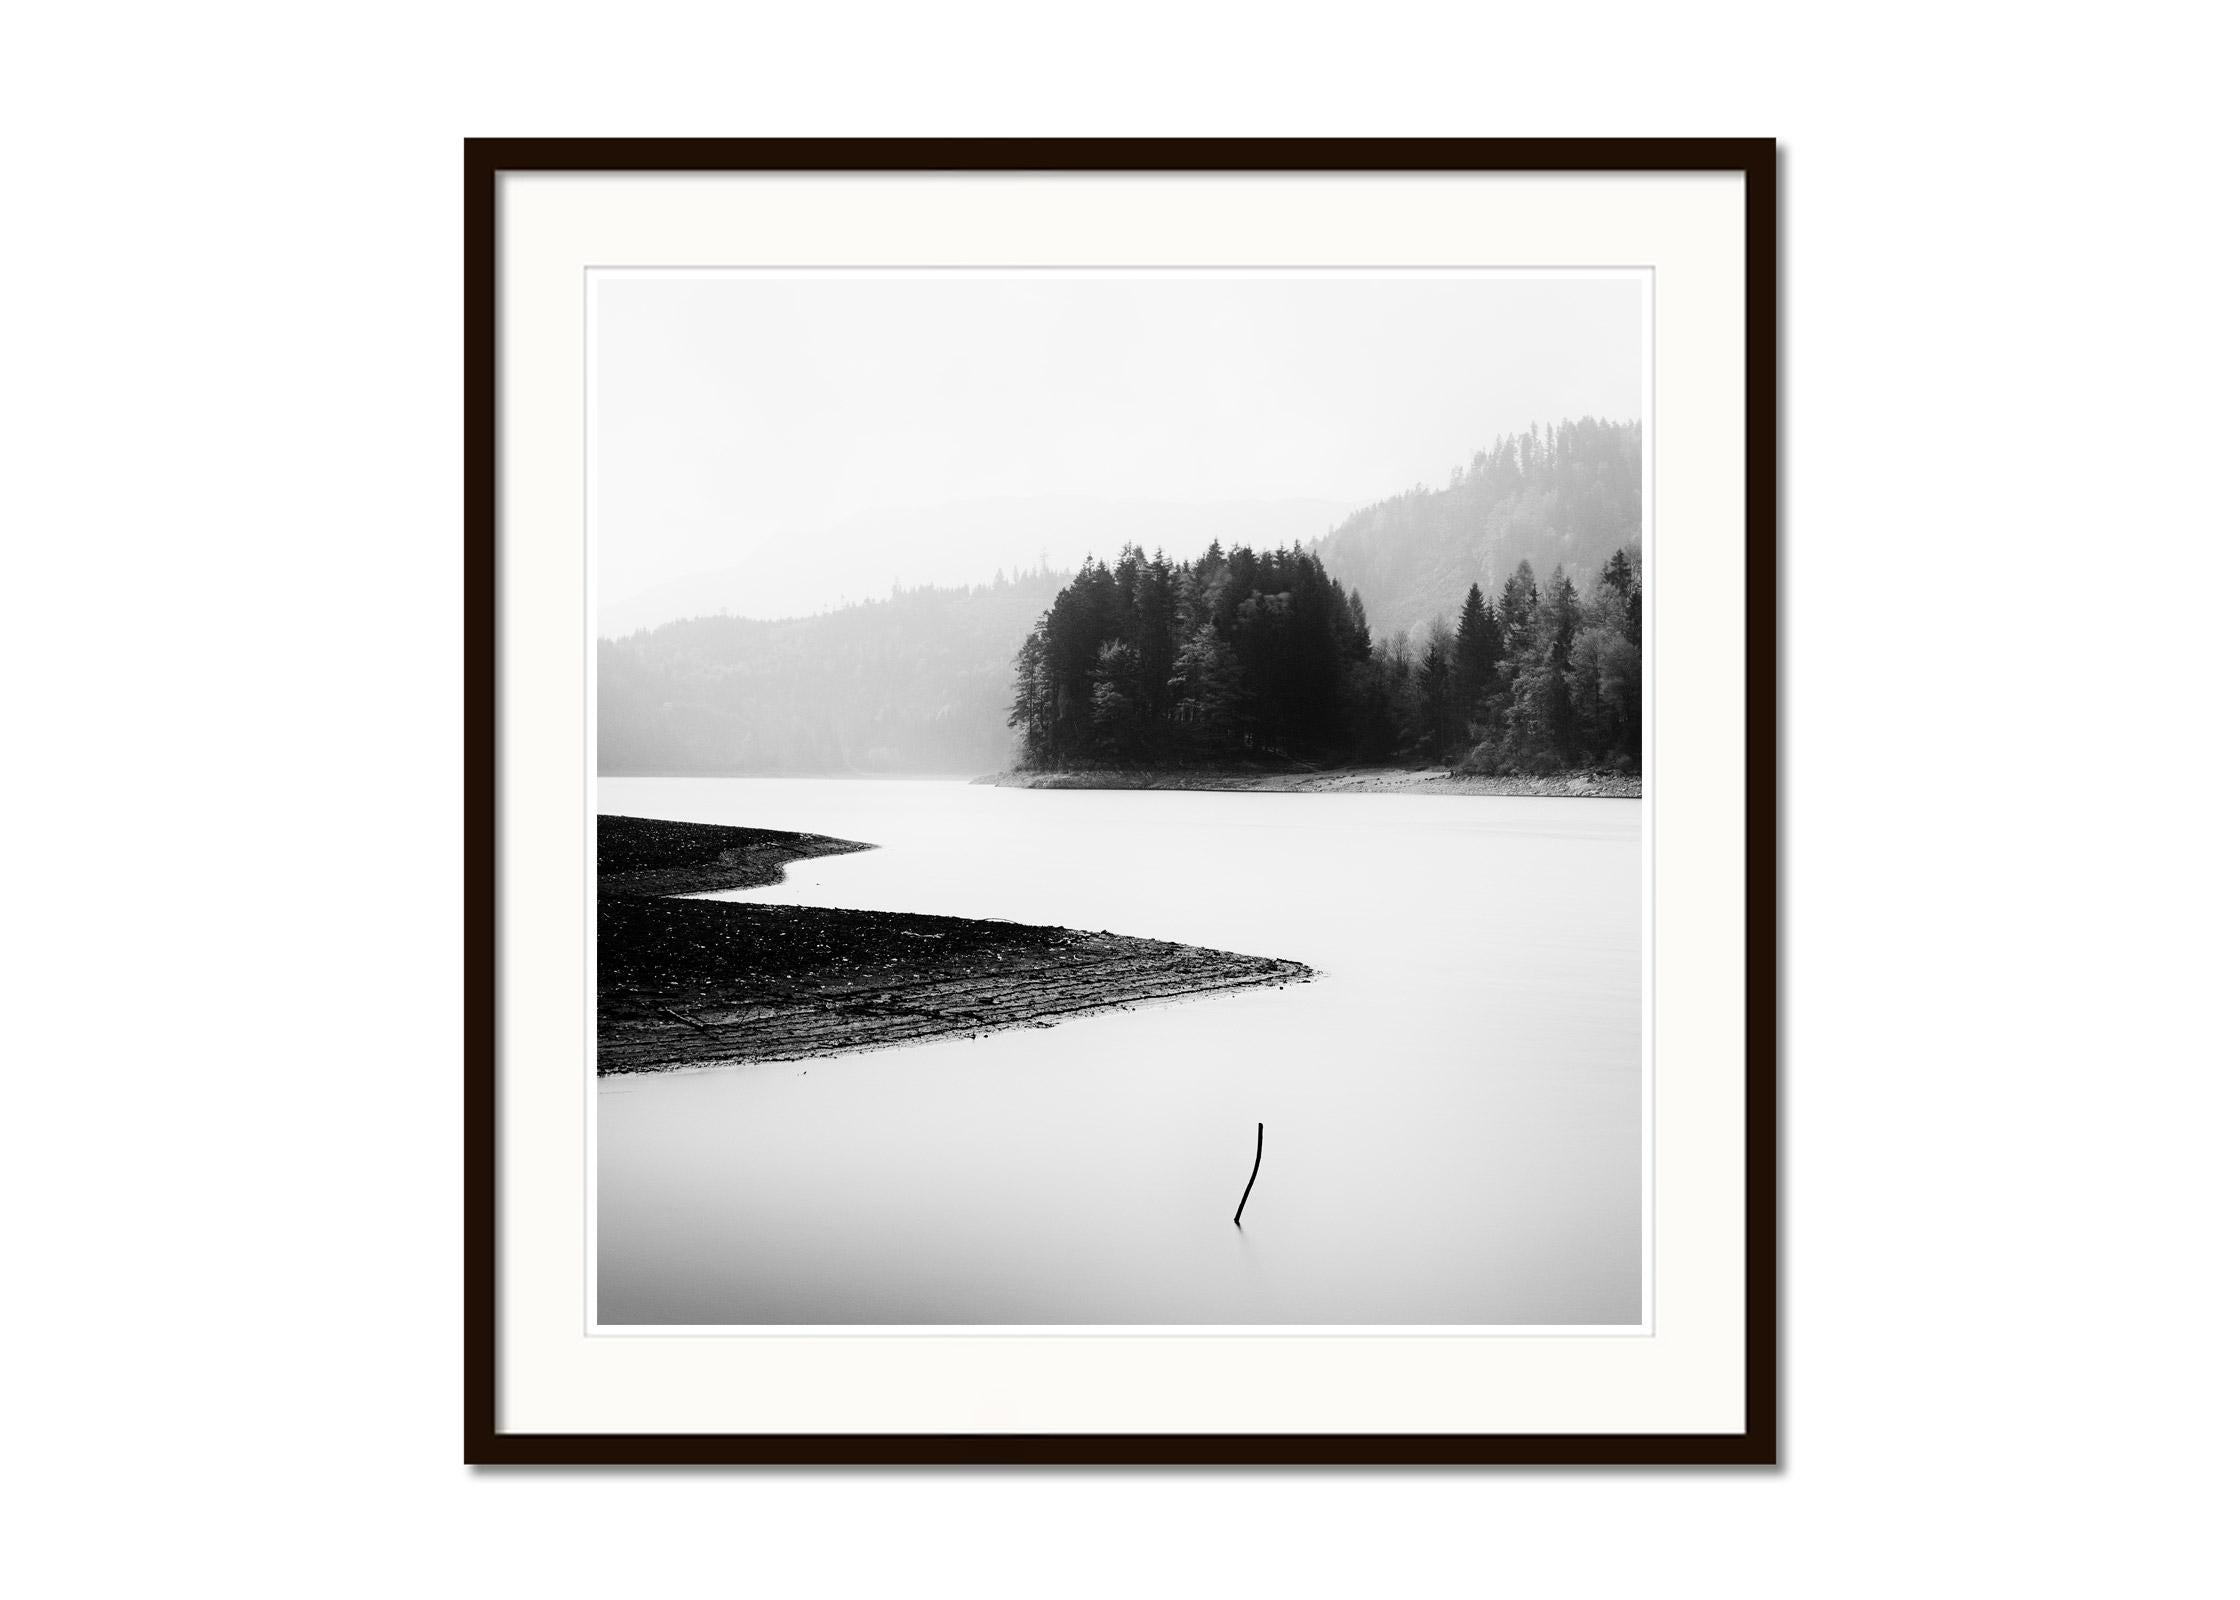 Minutes of Silence, mountain lake, black and white photography, art, landscape - Gray Black and White Photograph by Gerald Berghammer